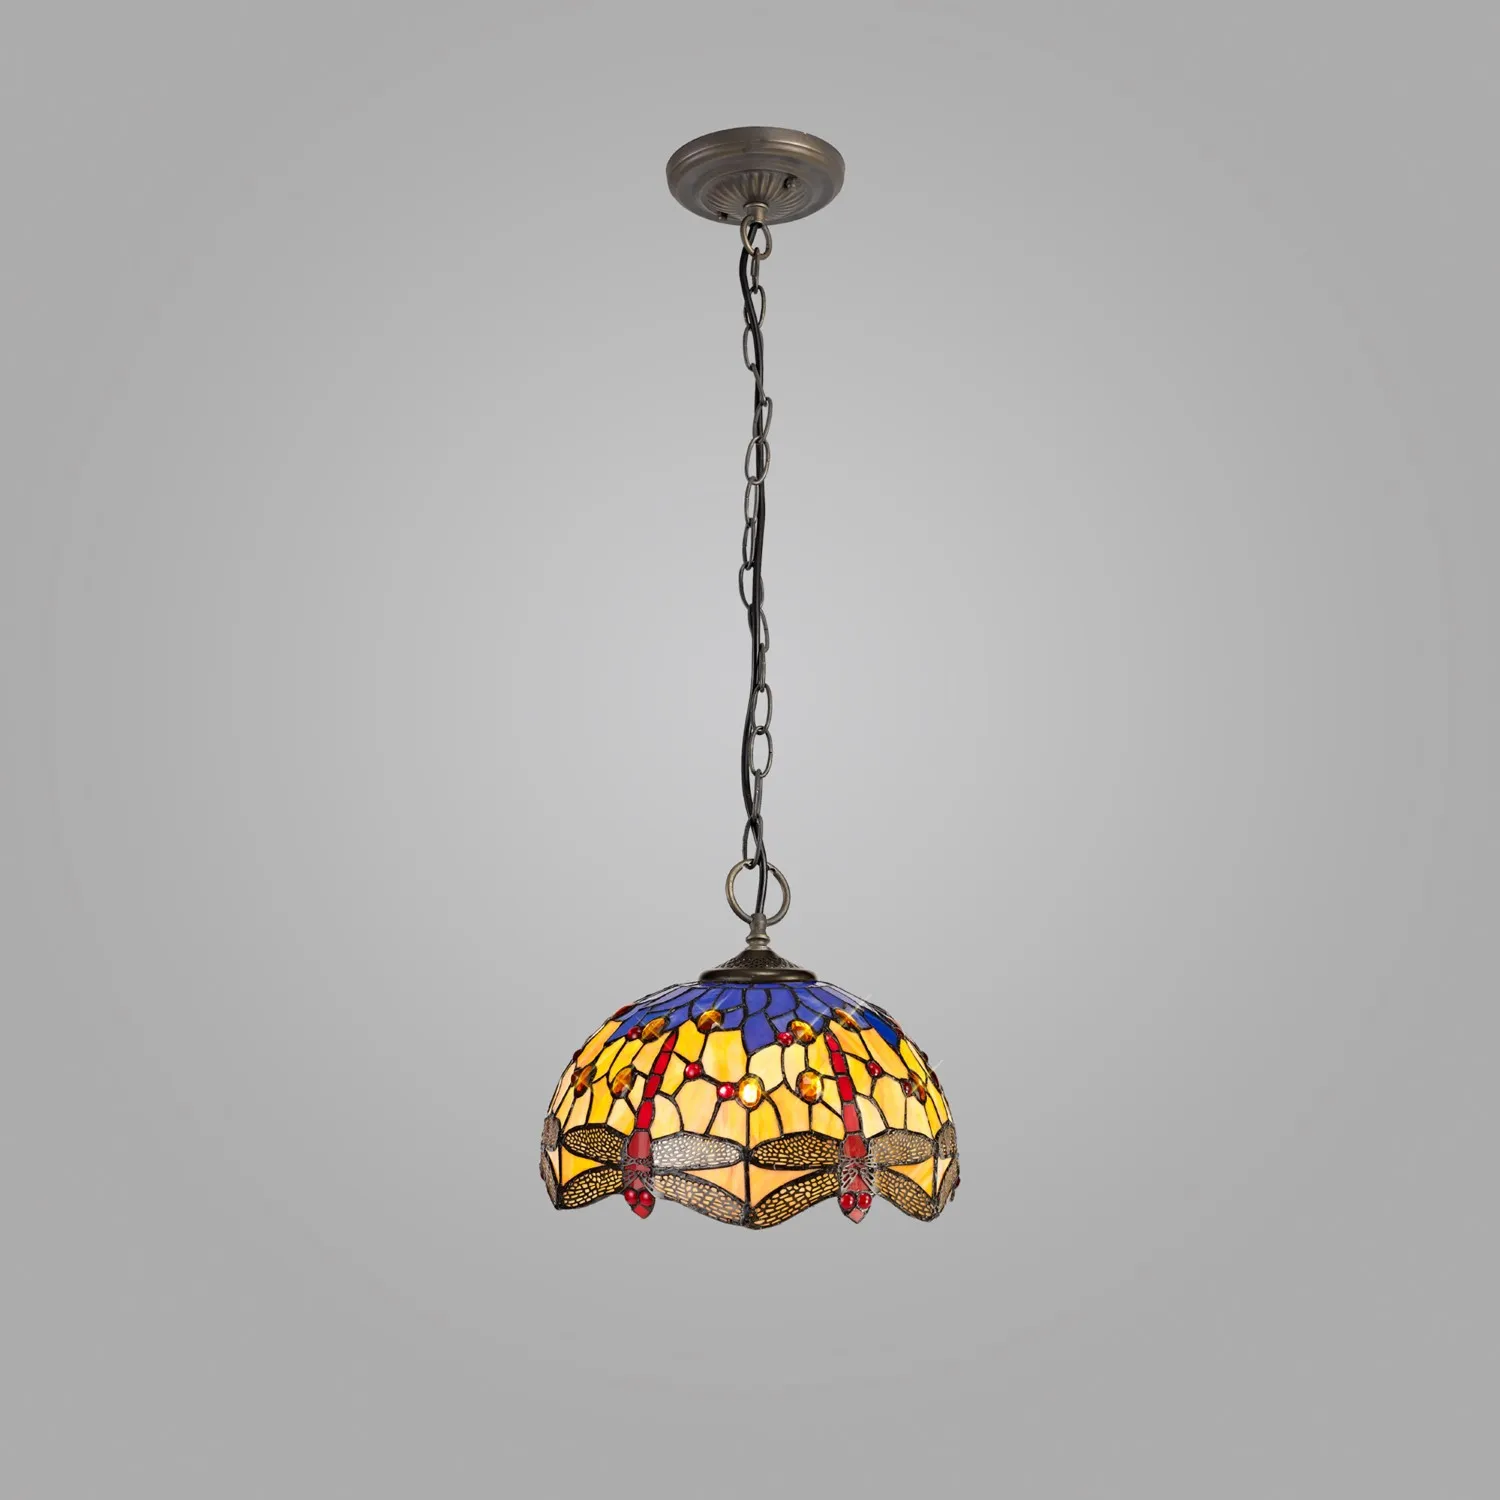 Hitchin 3 Light Downlighter Pendant E27 With 30cm Tiffany Shade, Blue Orange Crystal Aged Antique Brass